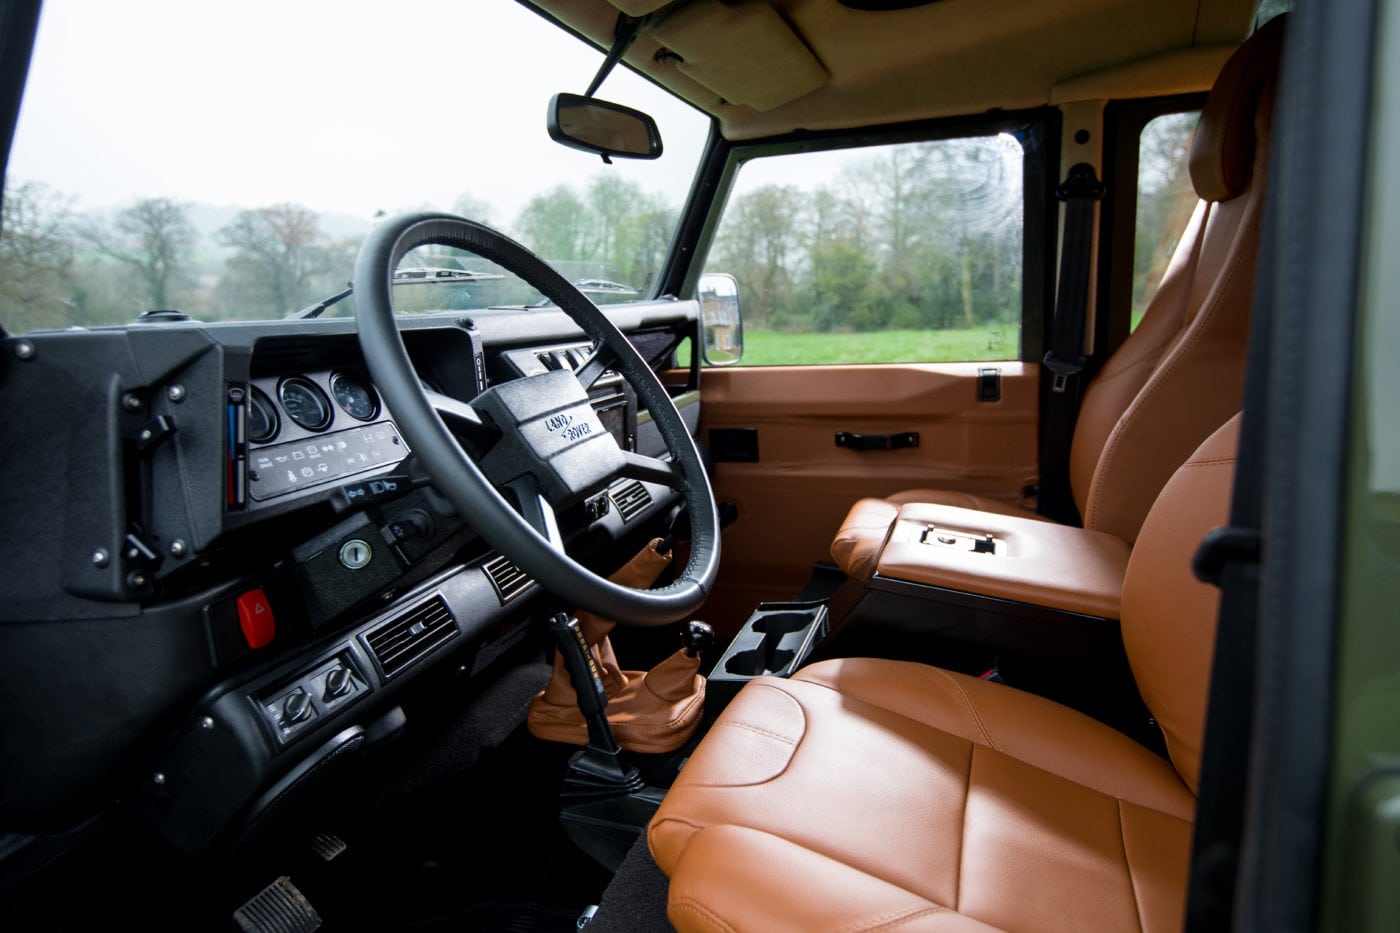 Every Defender 90 interior combines luxury and utility.